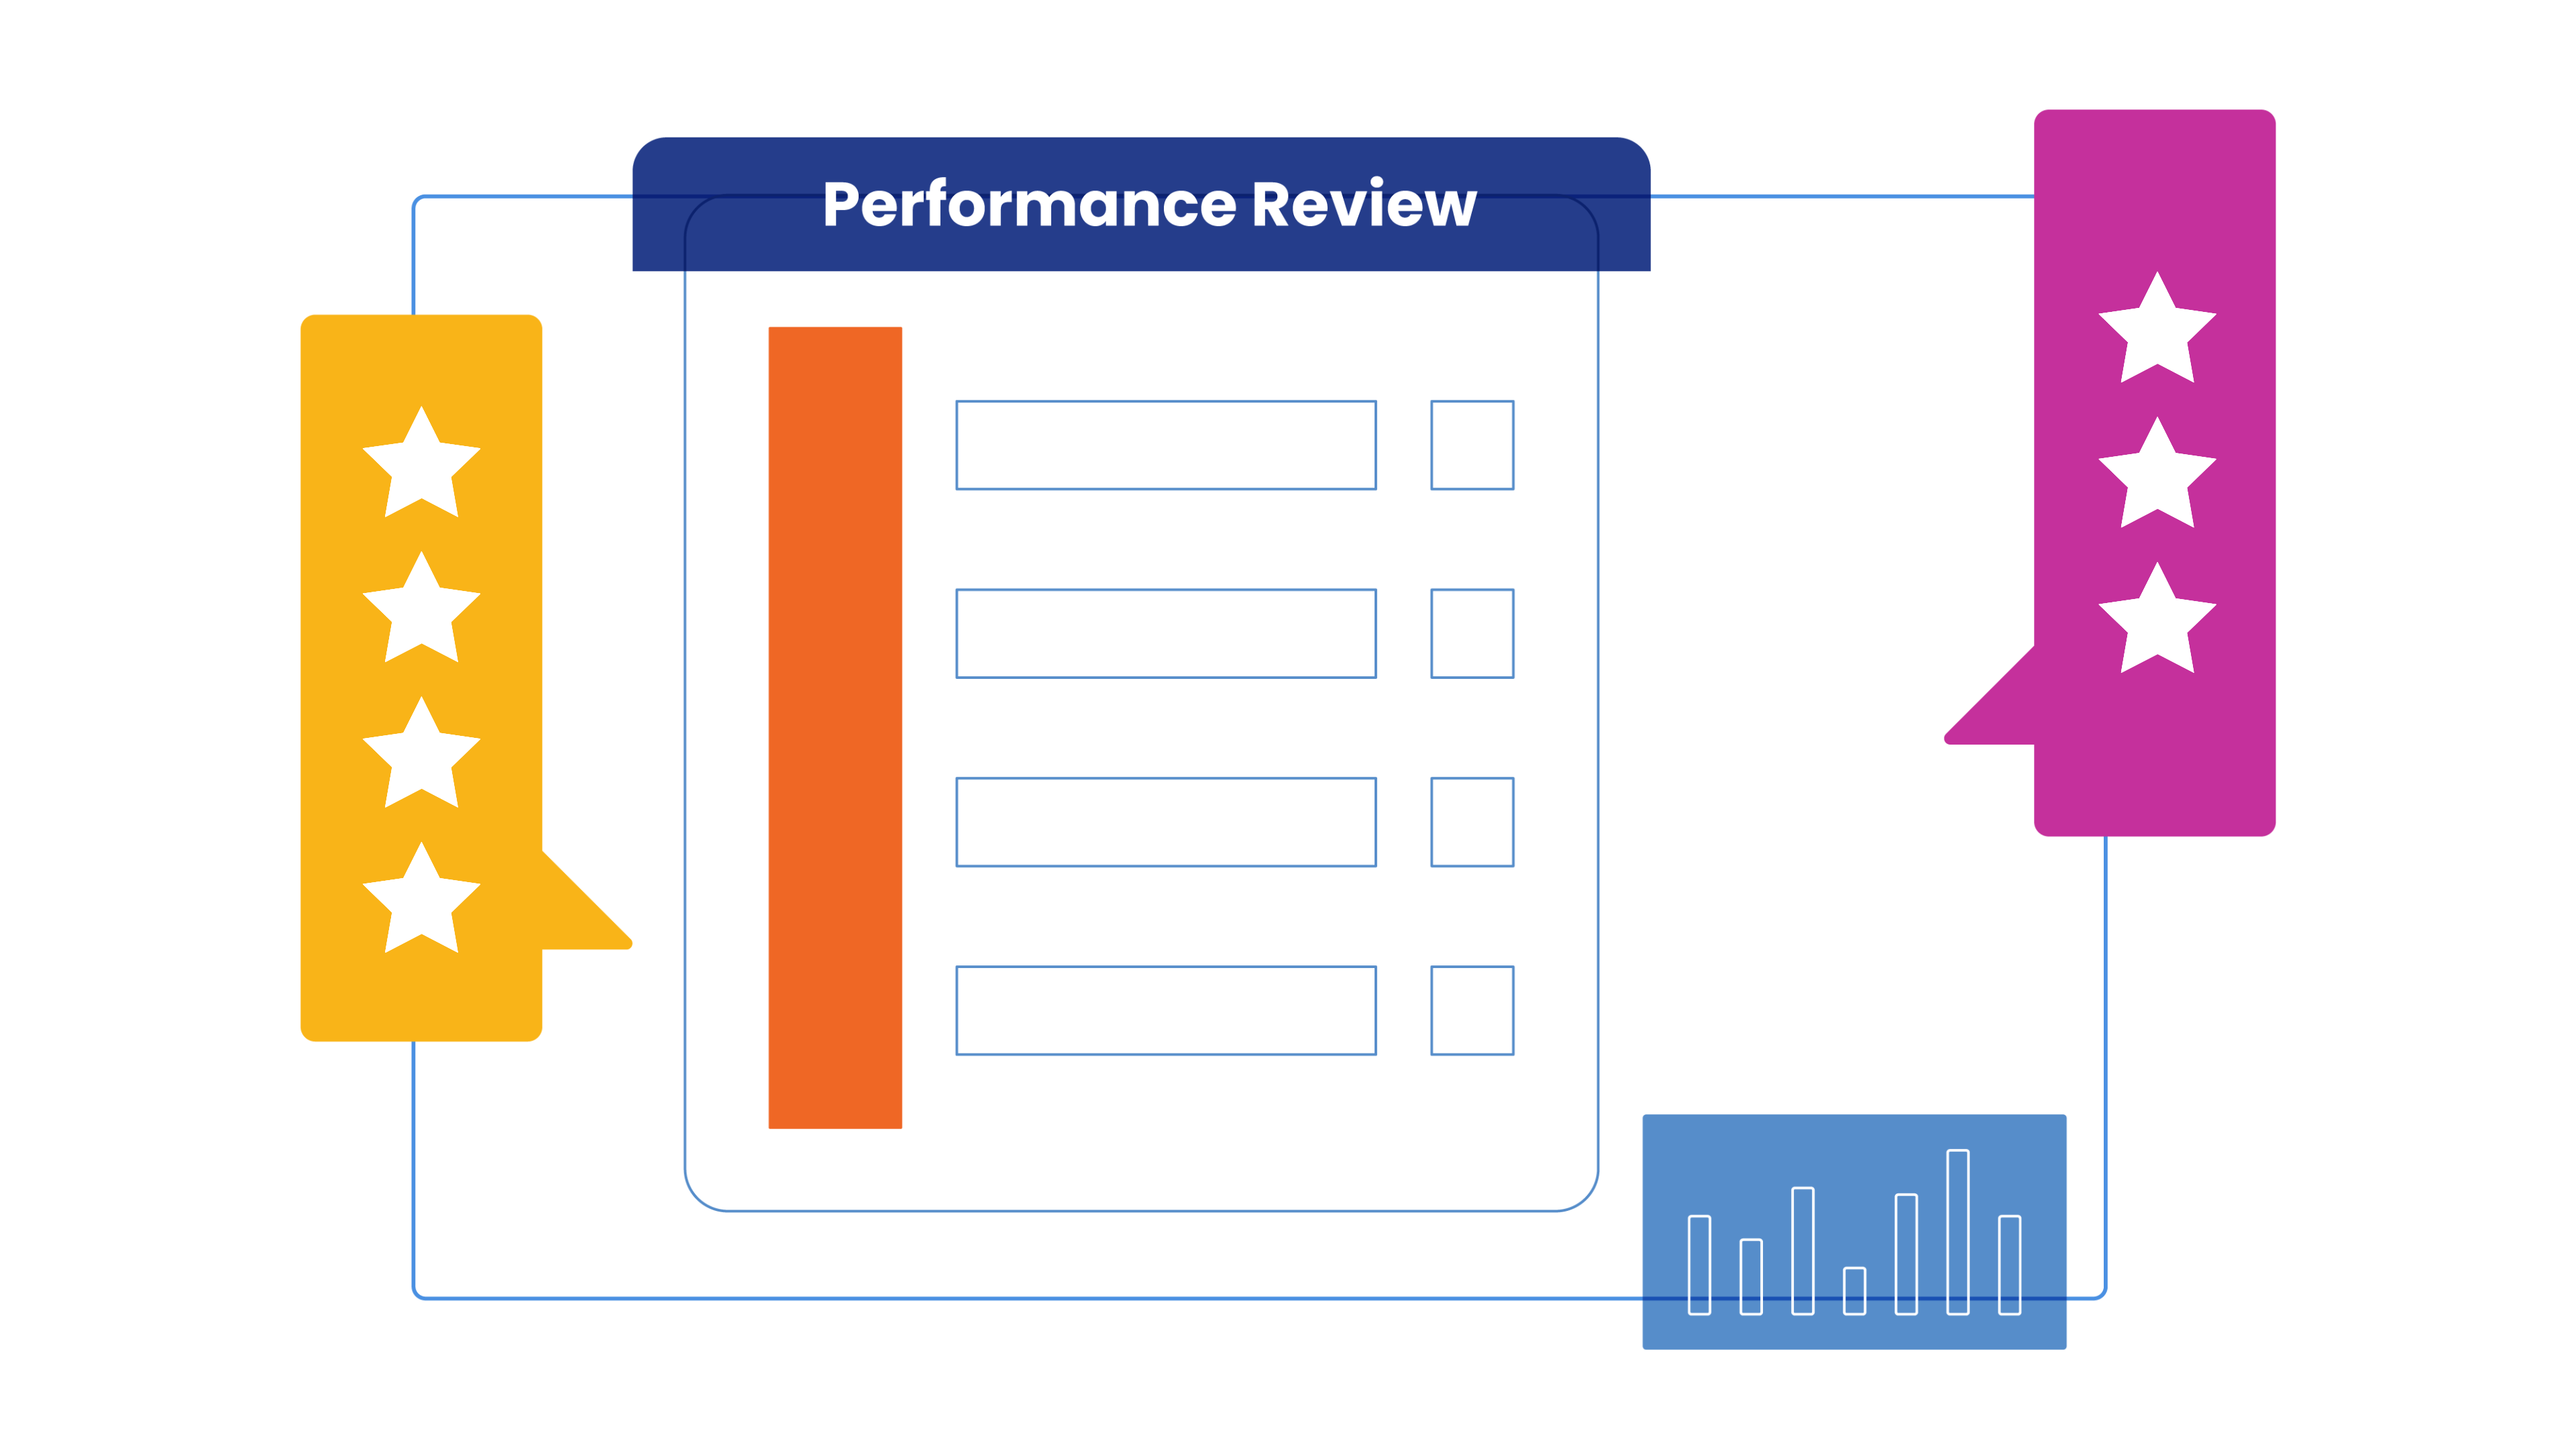 Performance Review Gap between diverse groups